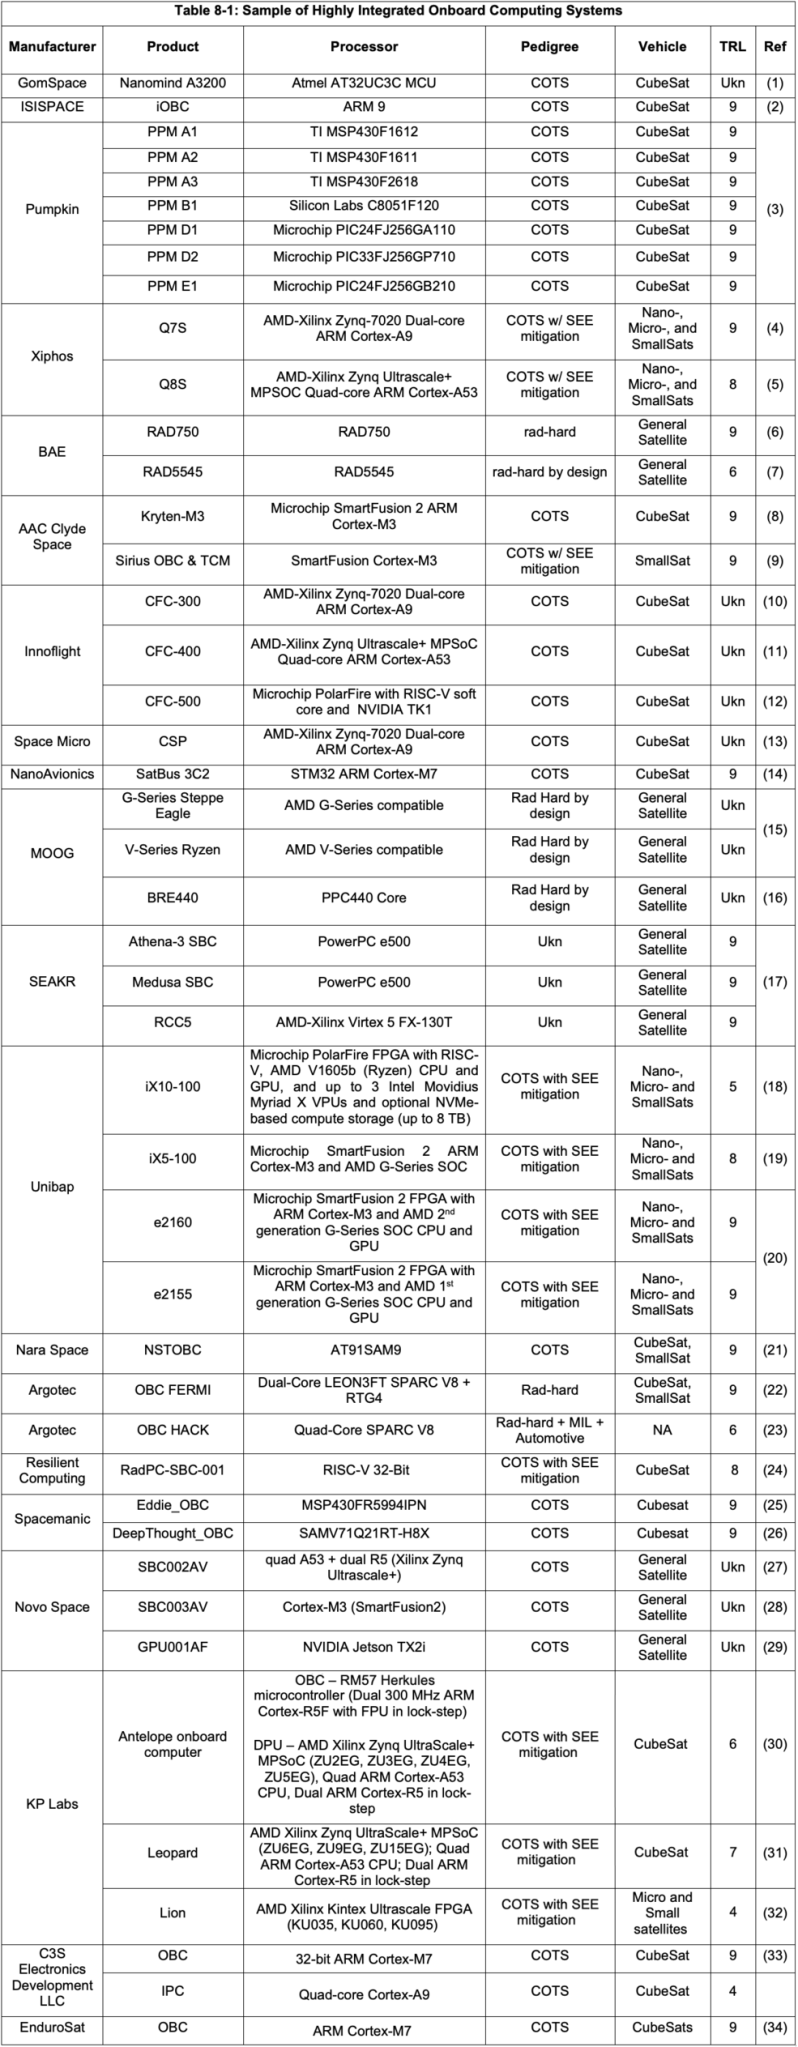 Table 8-1: Sample of Highly Integrated Onboard Computing Systems (see PDF)